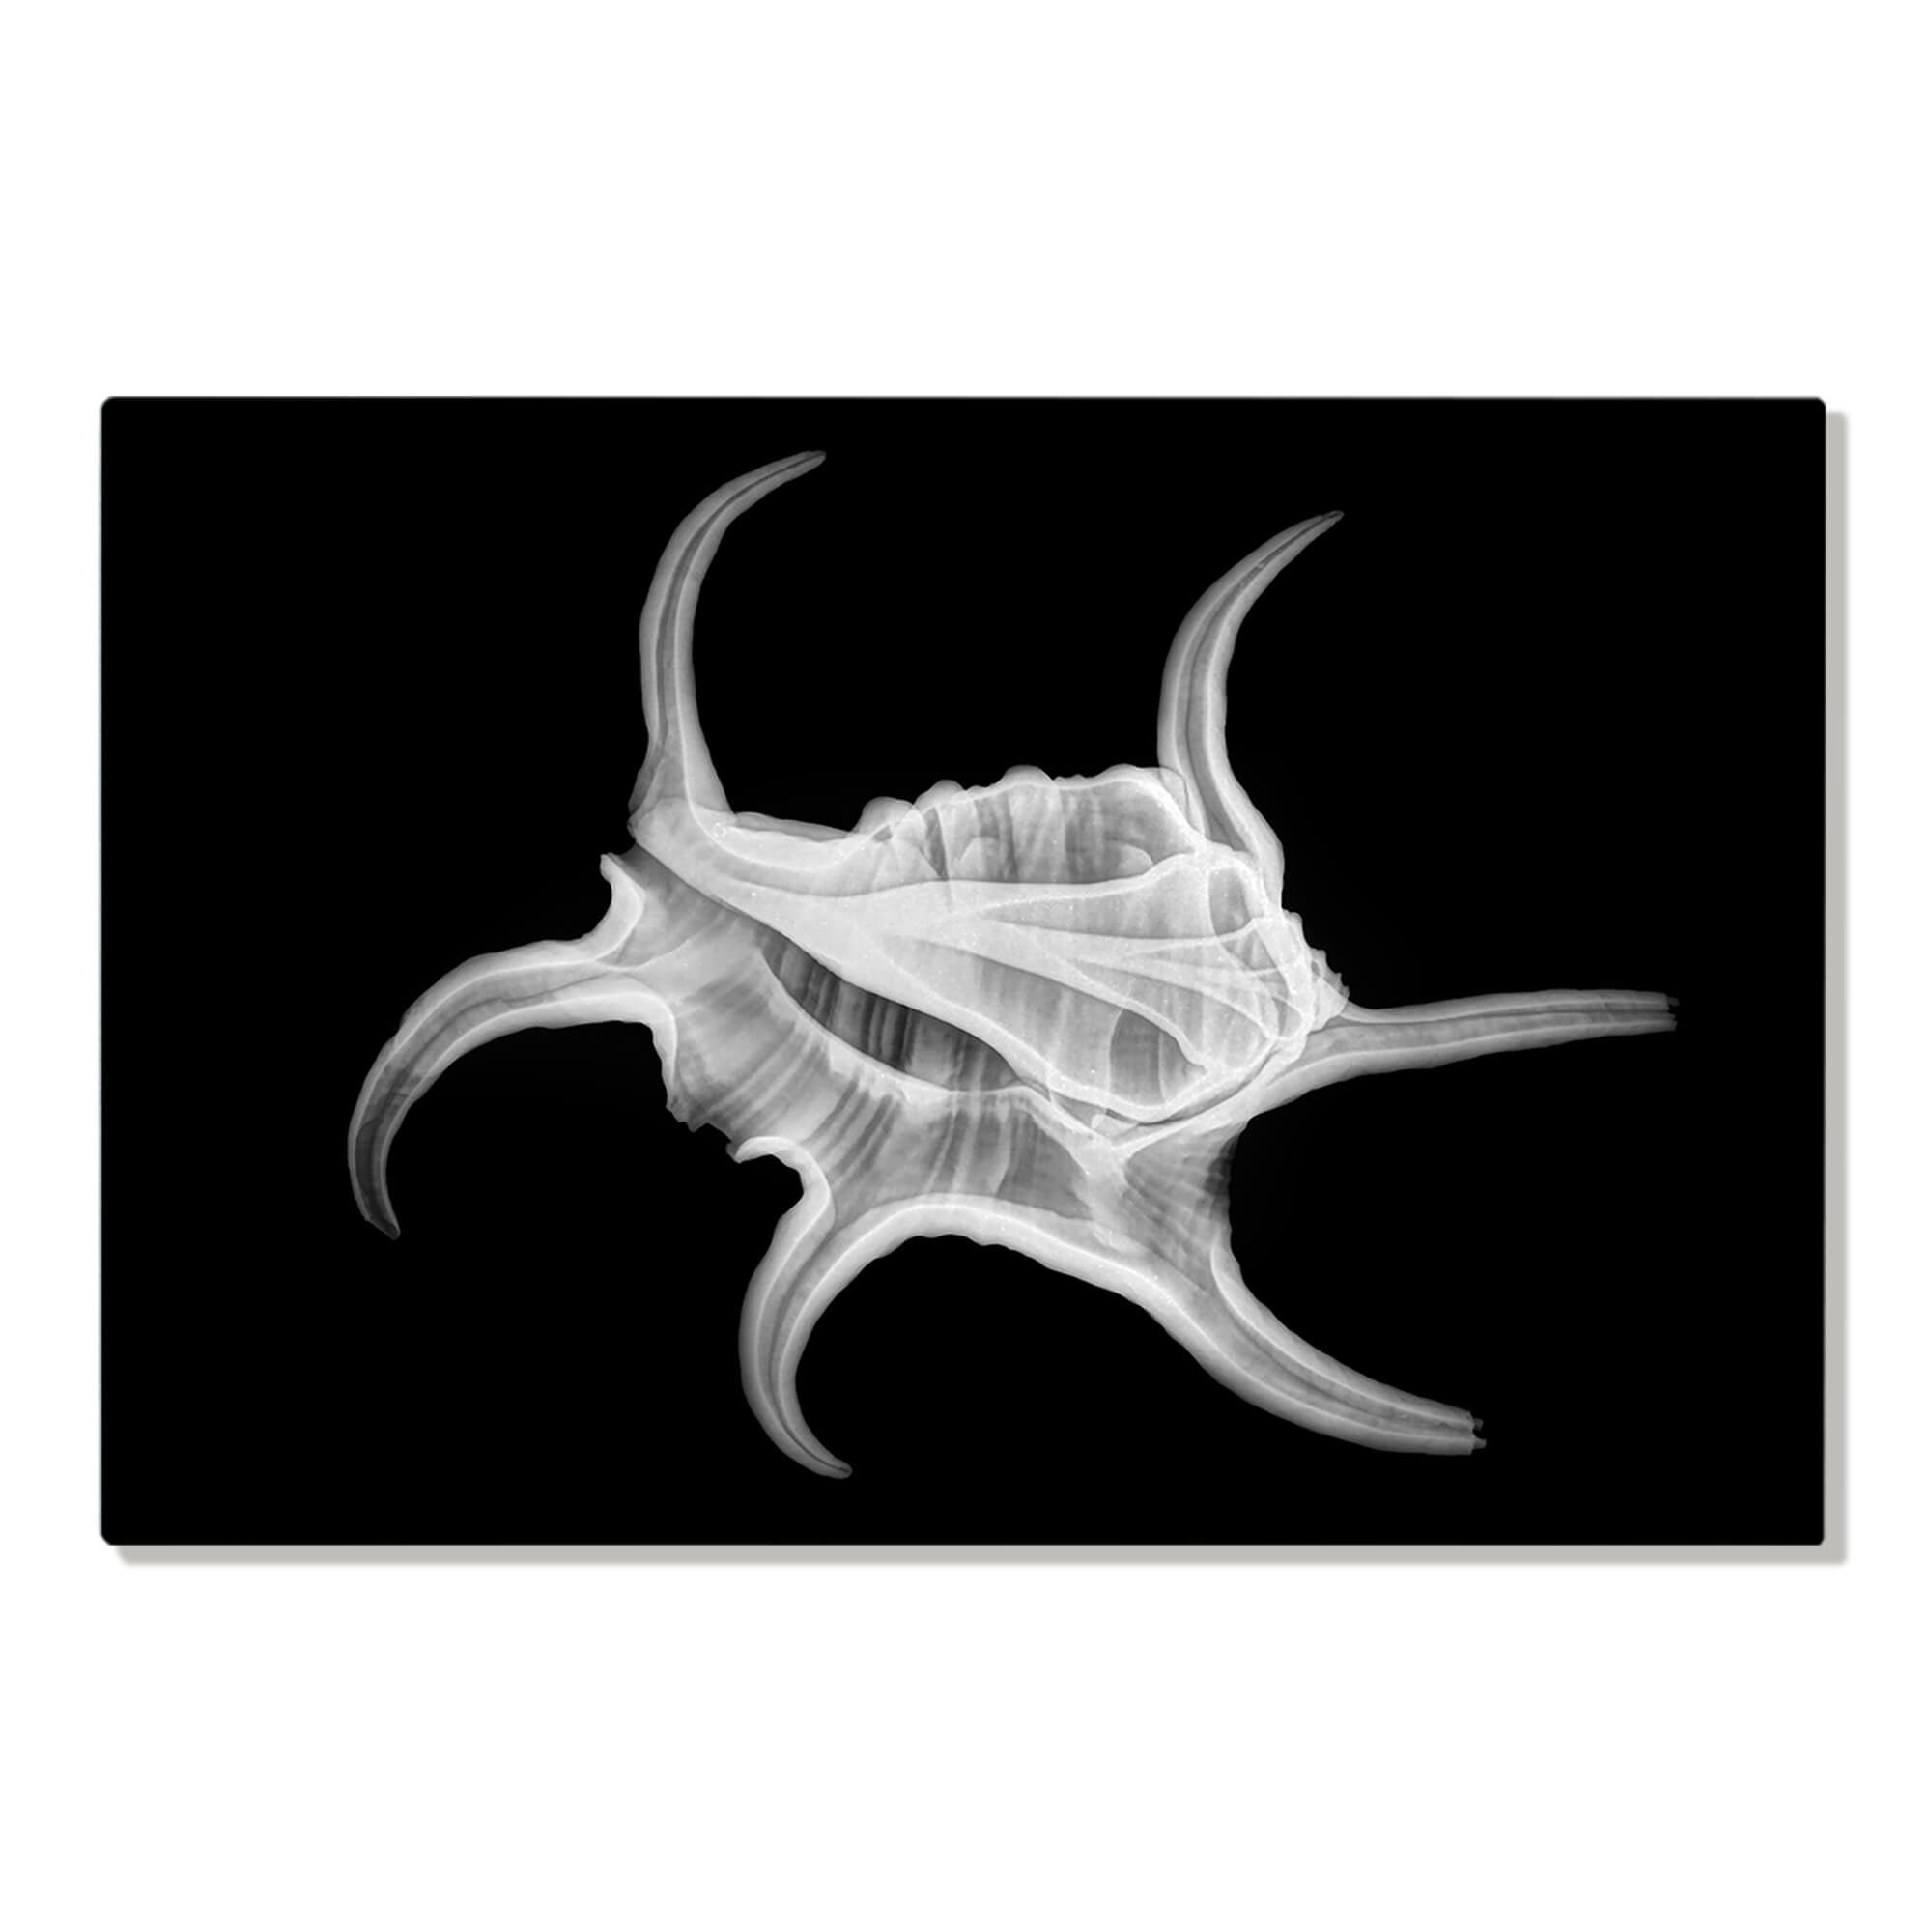 Metal art print featuring an X-ray of a spider conch by Hawaii artist Michelle Smith